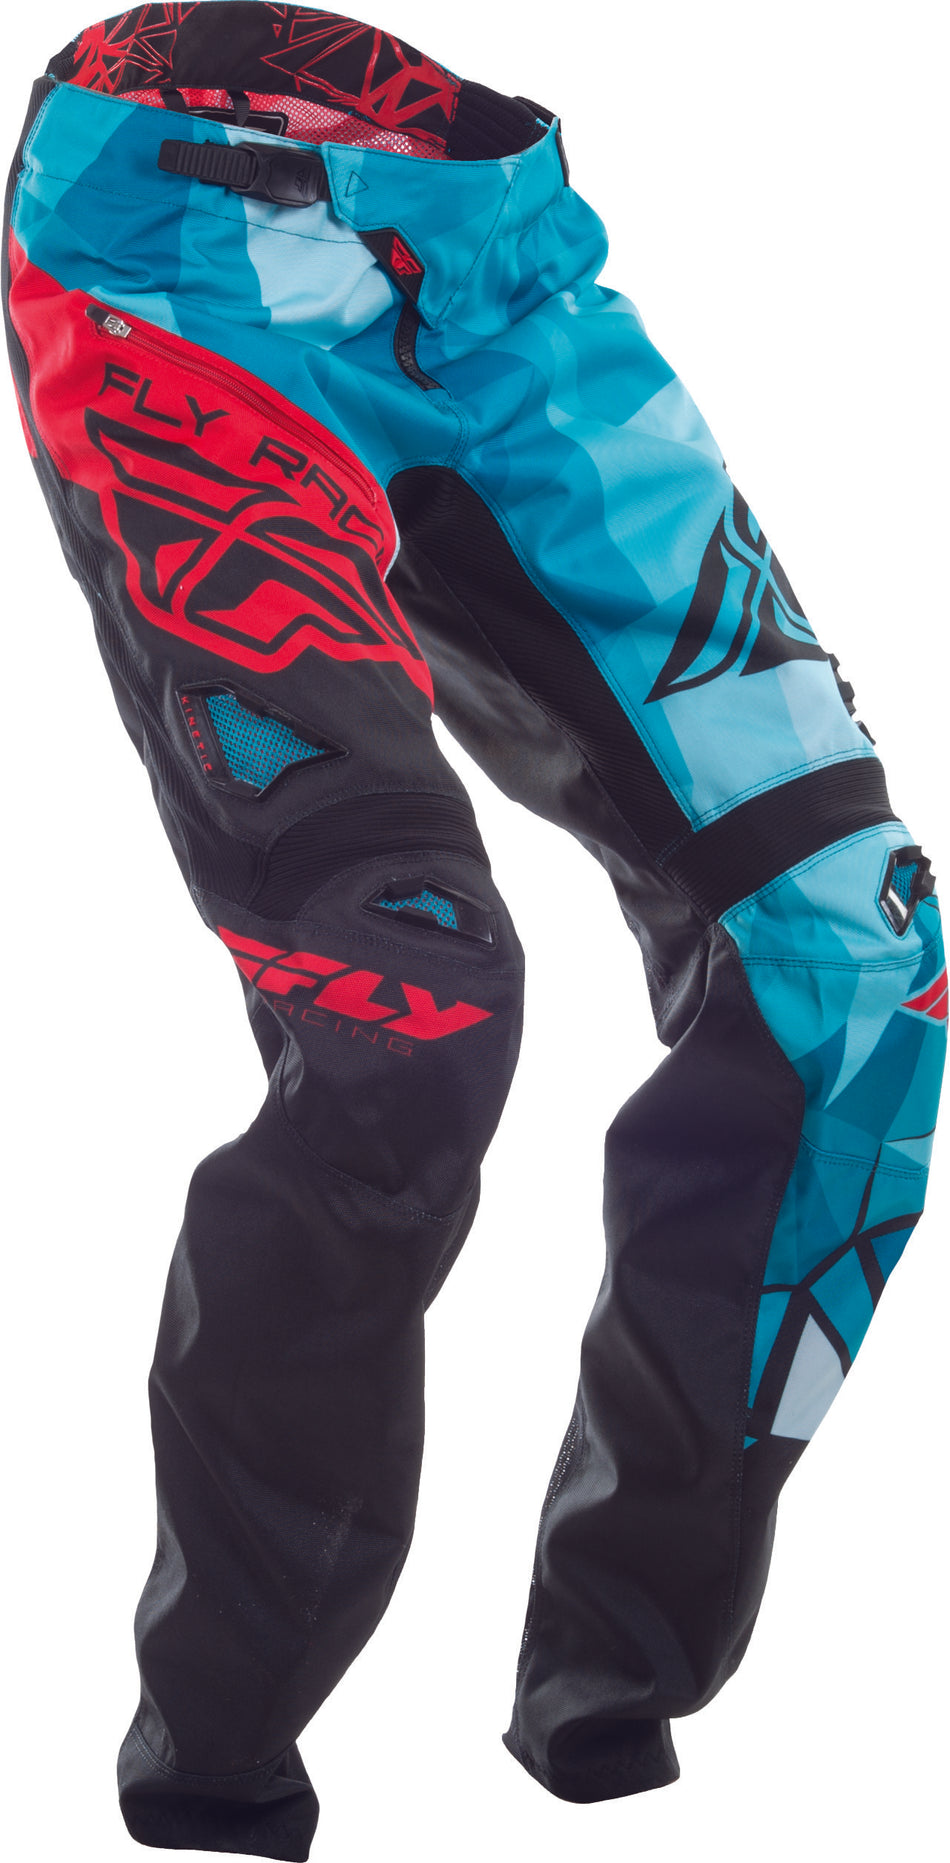 FLY RACING Bicycle Crux Pant Black/Teal/Red Sz 22 370-02922